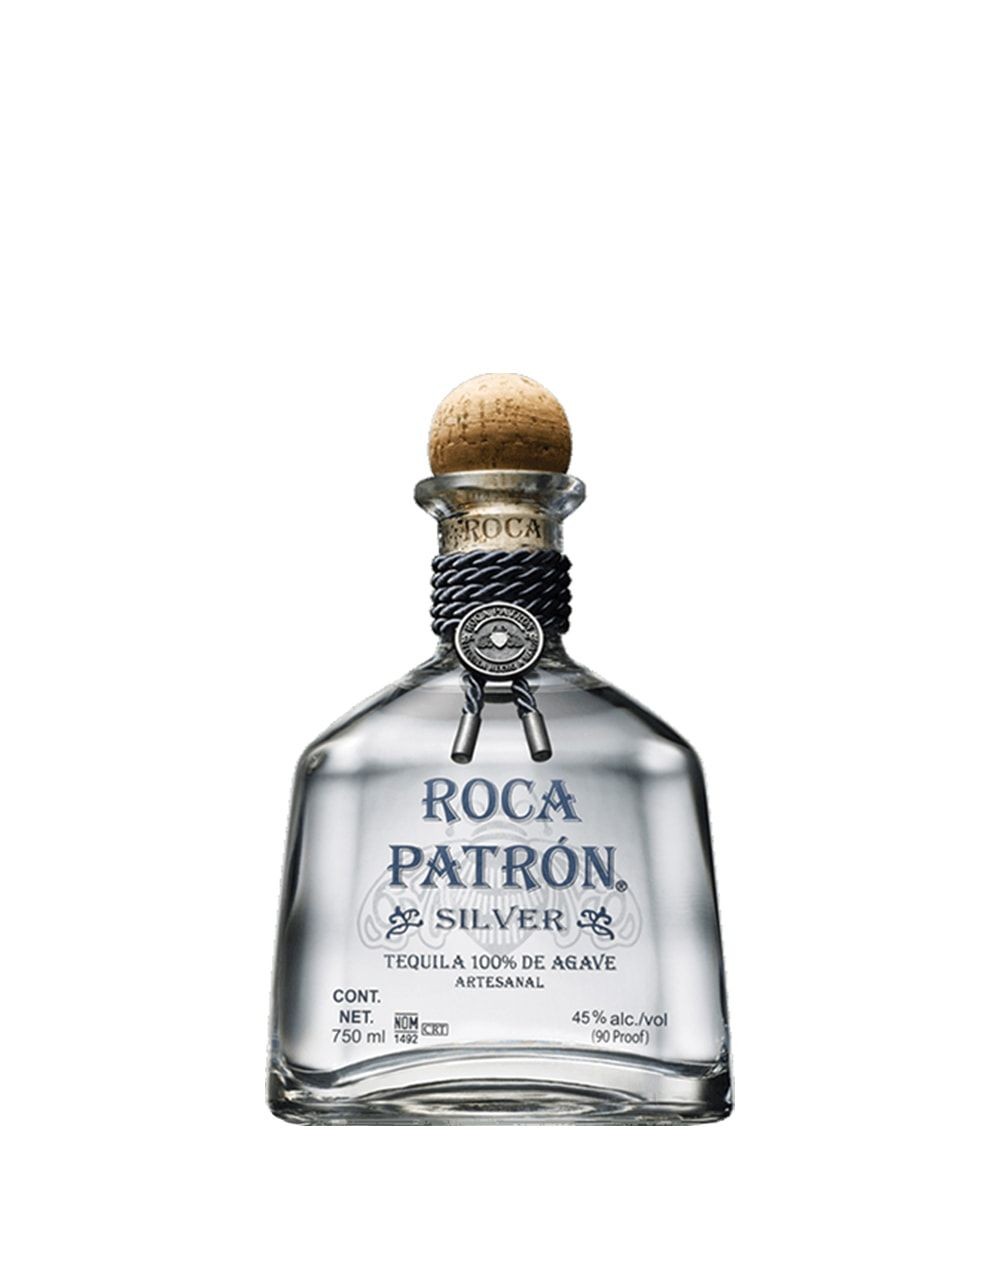 Roca Patrón Silver Tequila | Buy Online or Send as a Gift | ReserveBar